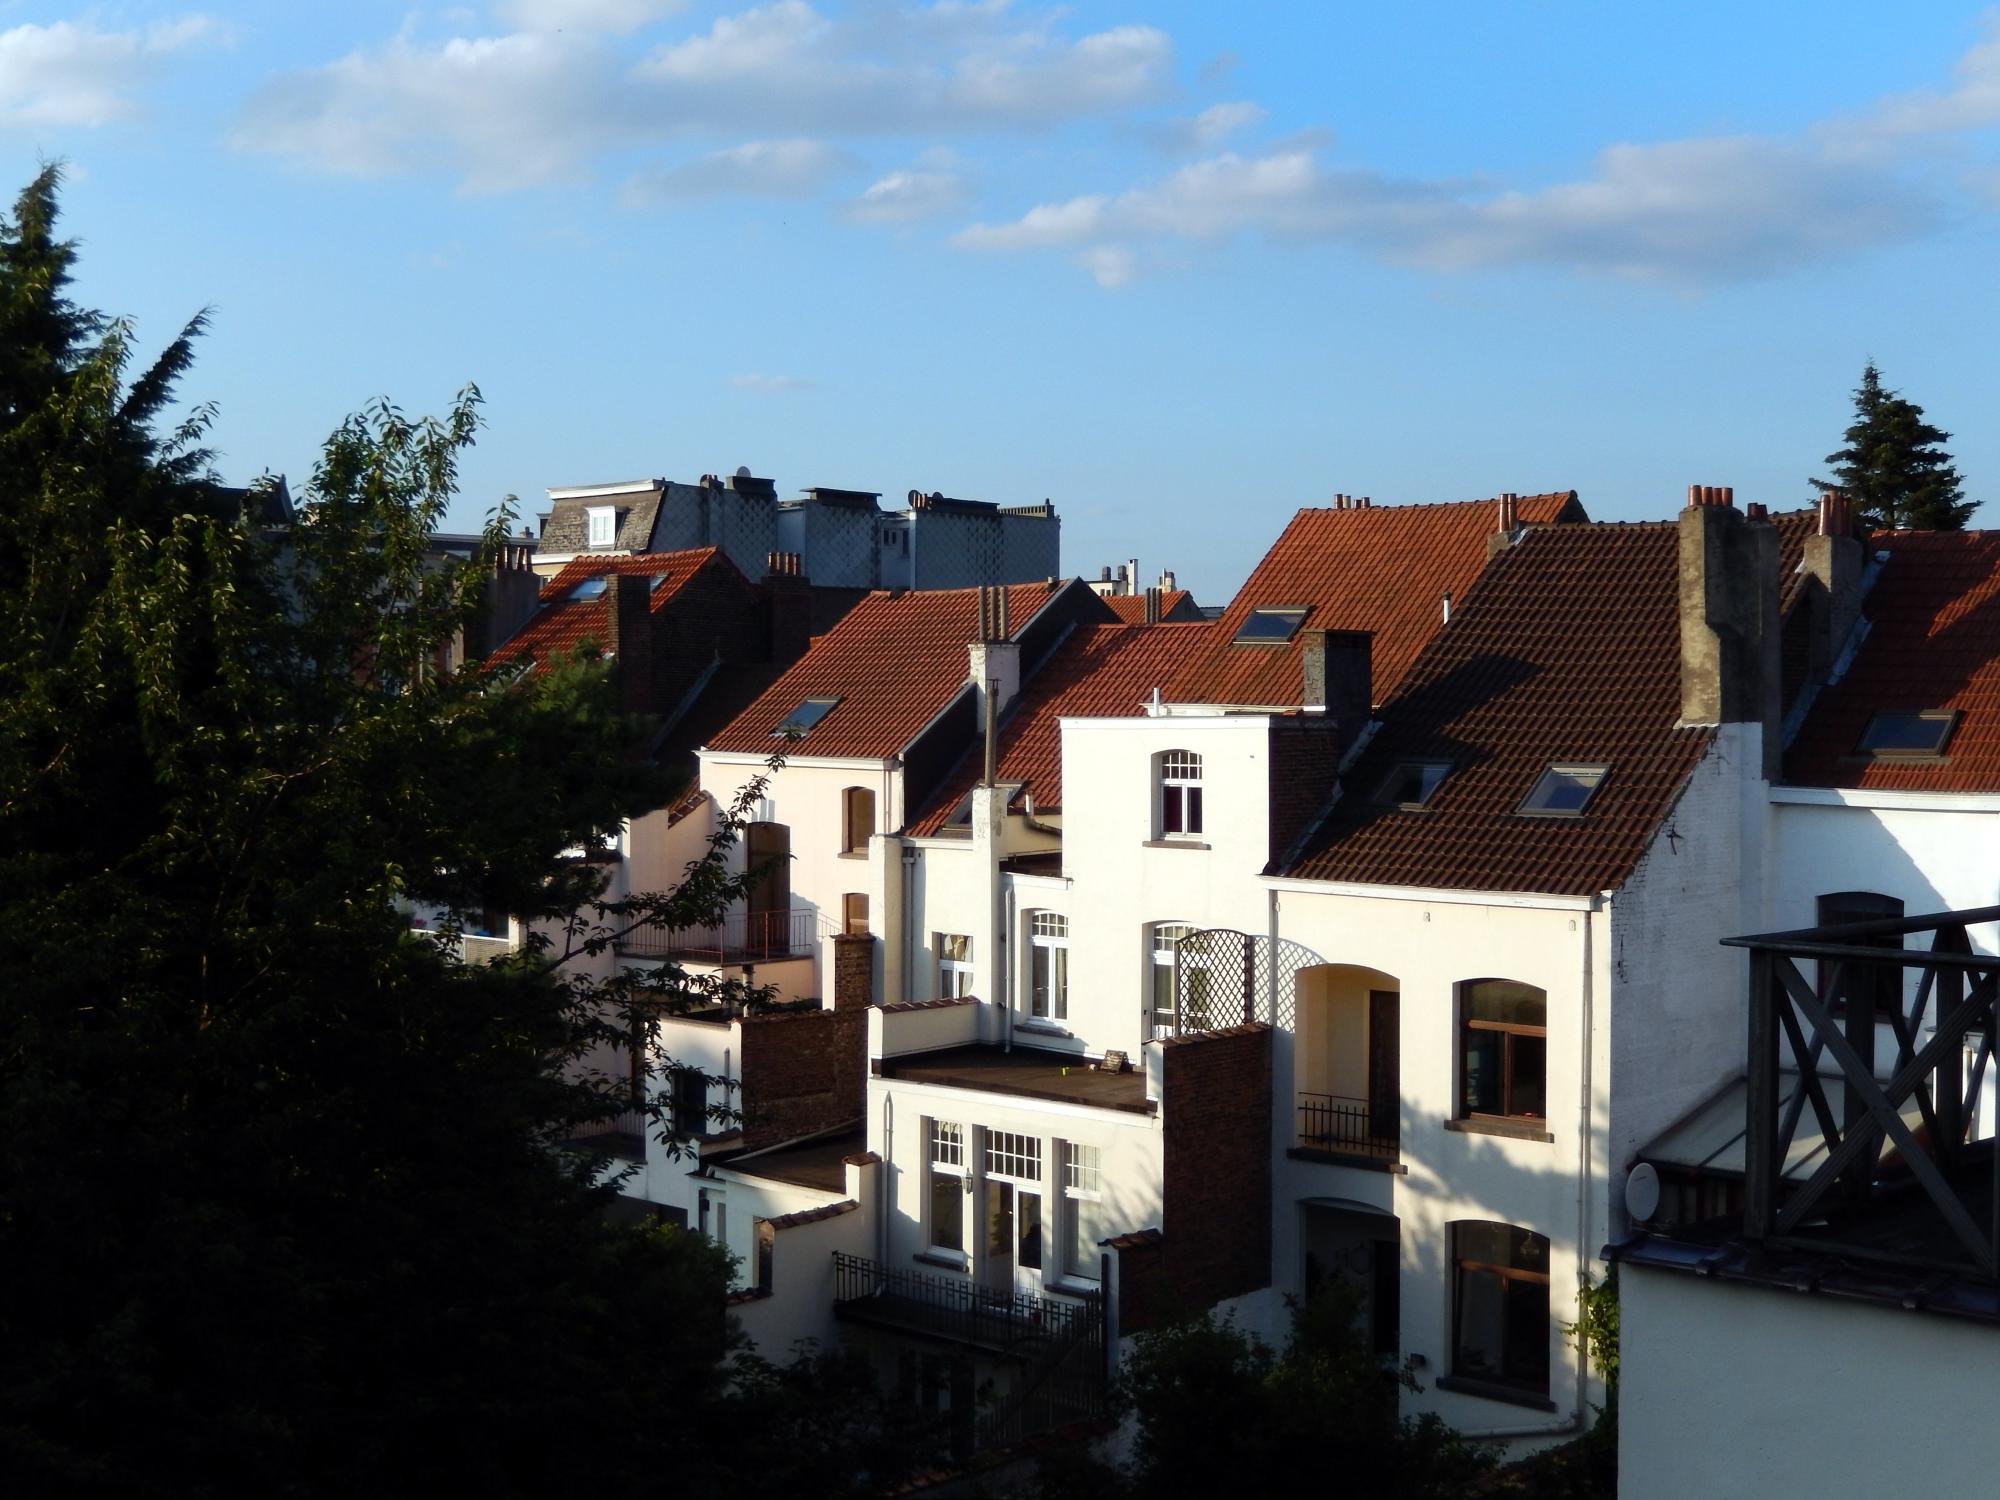 Brussels (2010-2016) - Backview